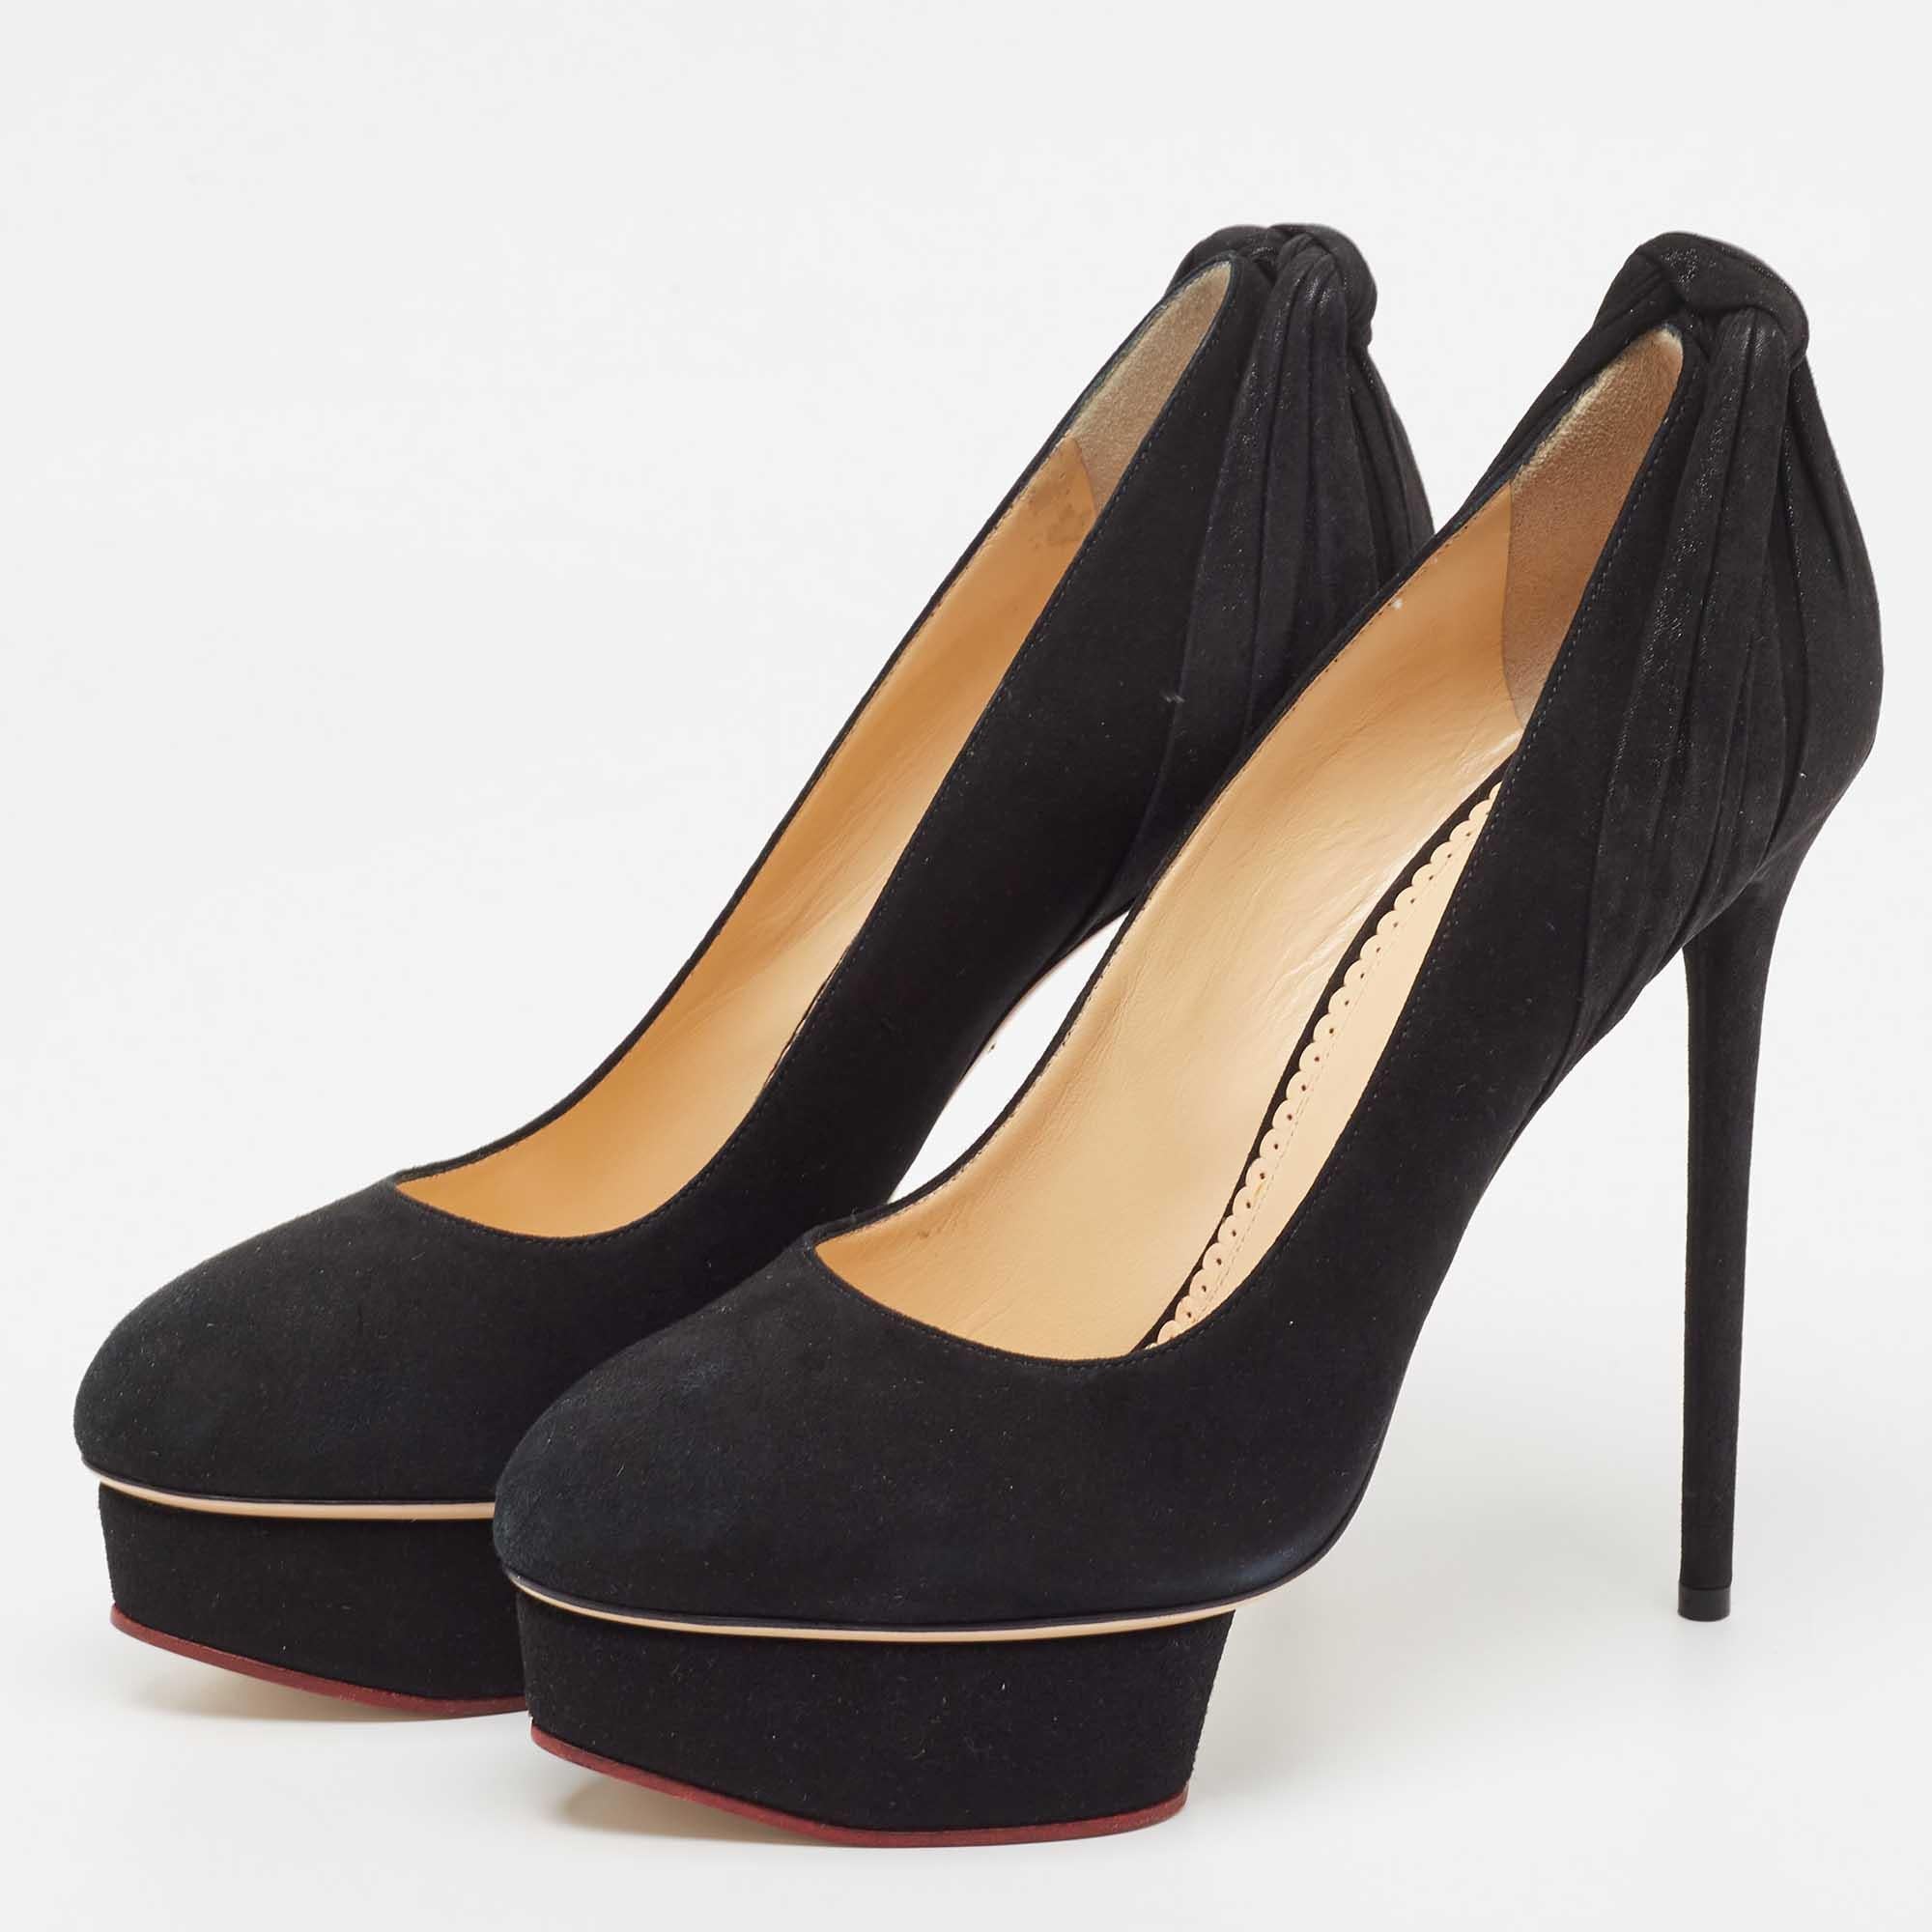 Make a chic style statement with these designer pumps. They showcase sturdy heels and durable soles, perfect for your fashionable outings!

Includes: Original Box